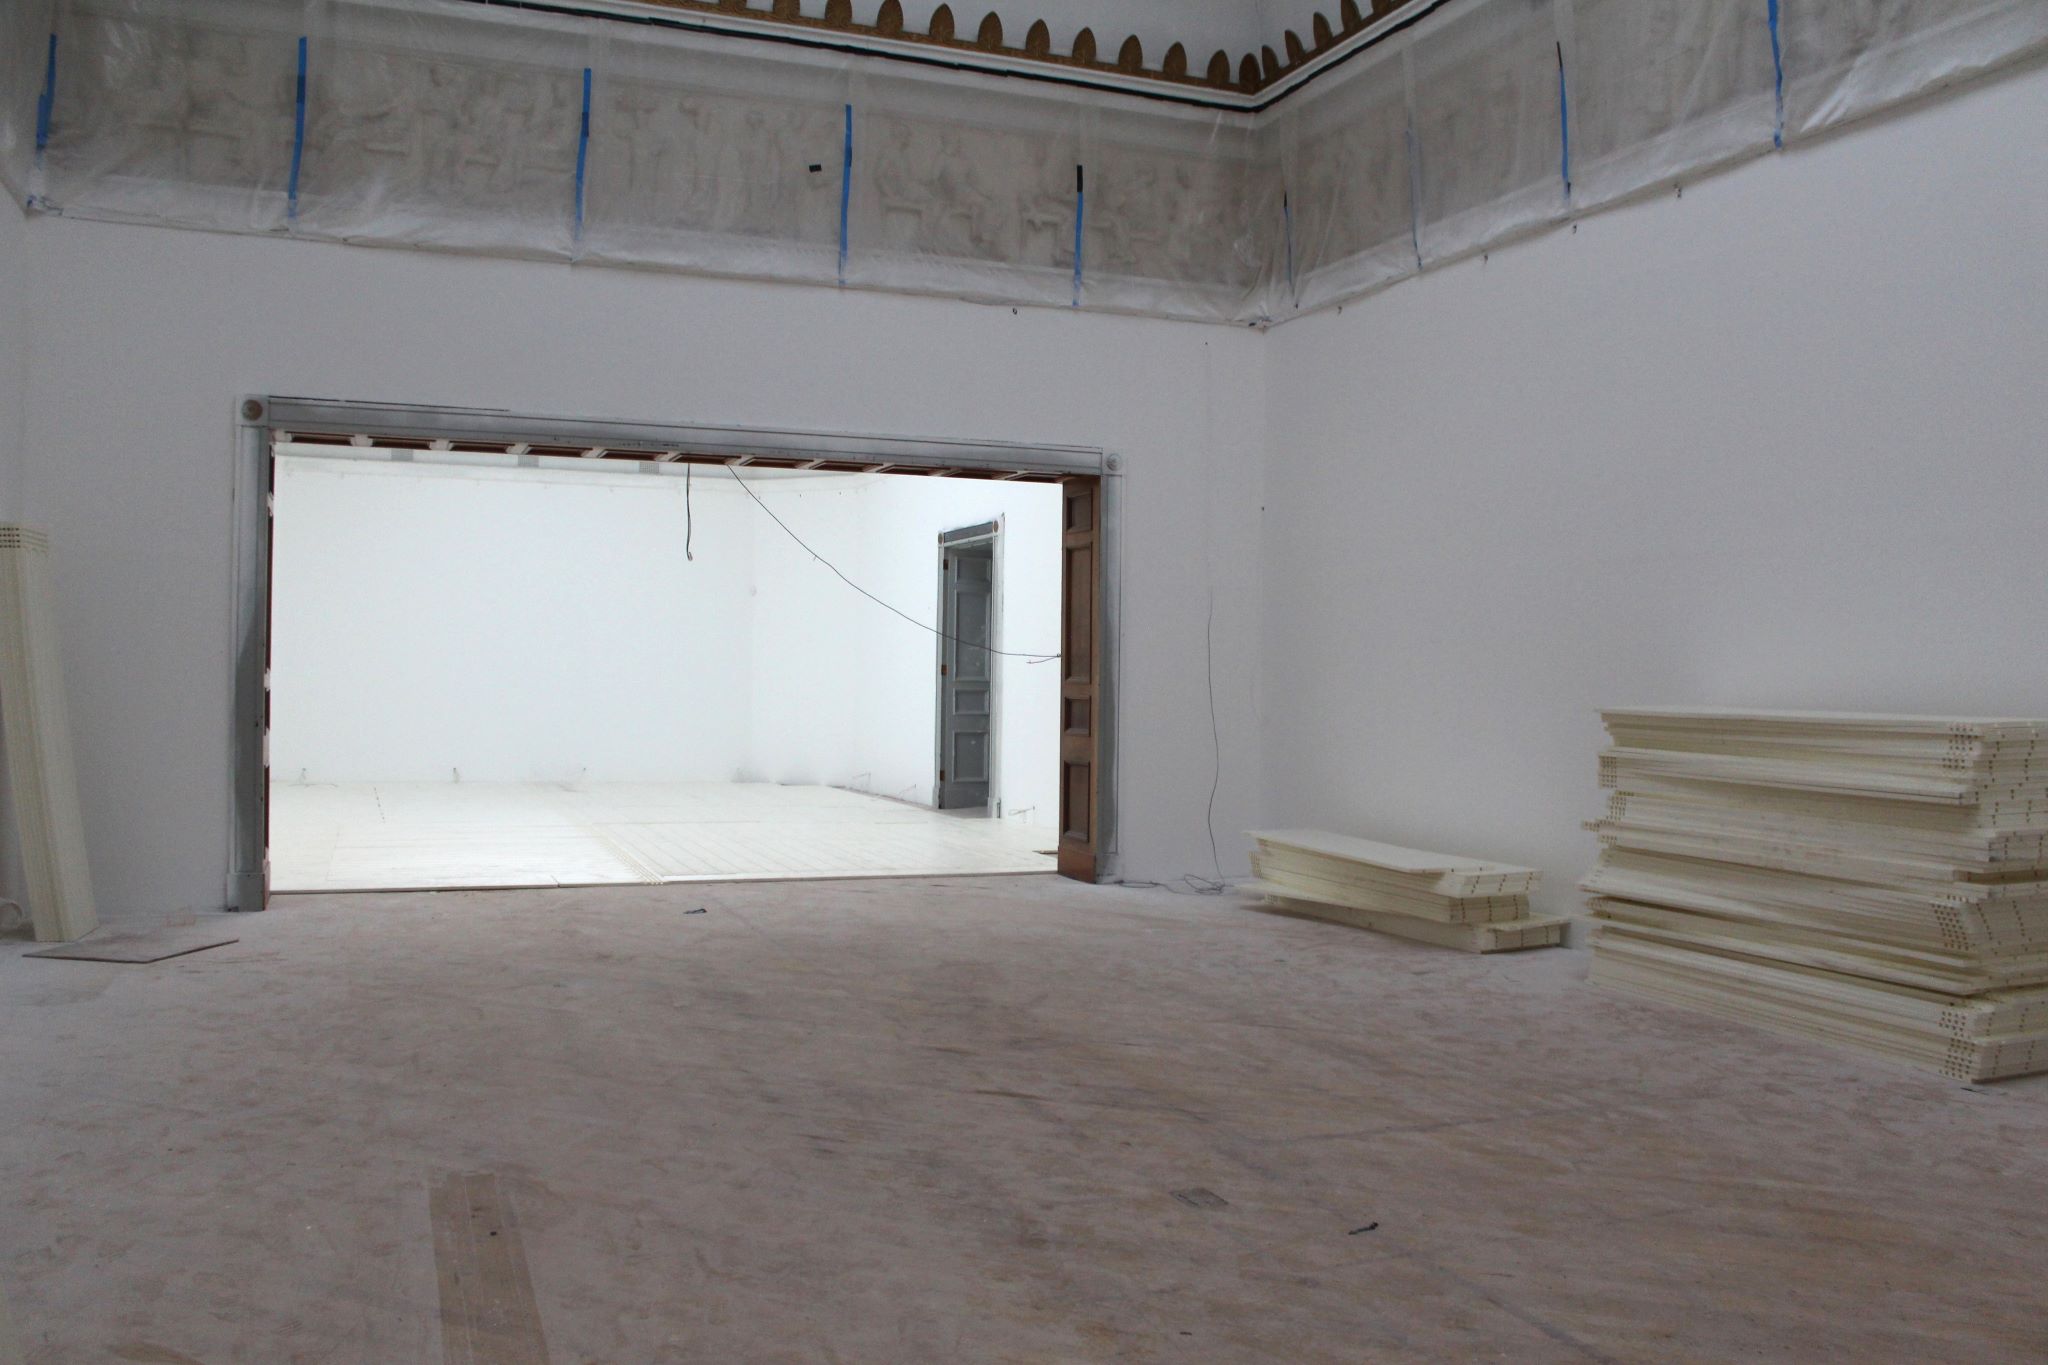 Two large gallery spaces with floorboards removed and piles of flooring to the side of the space 